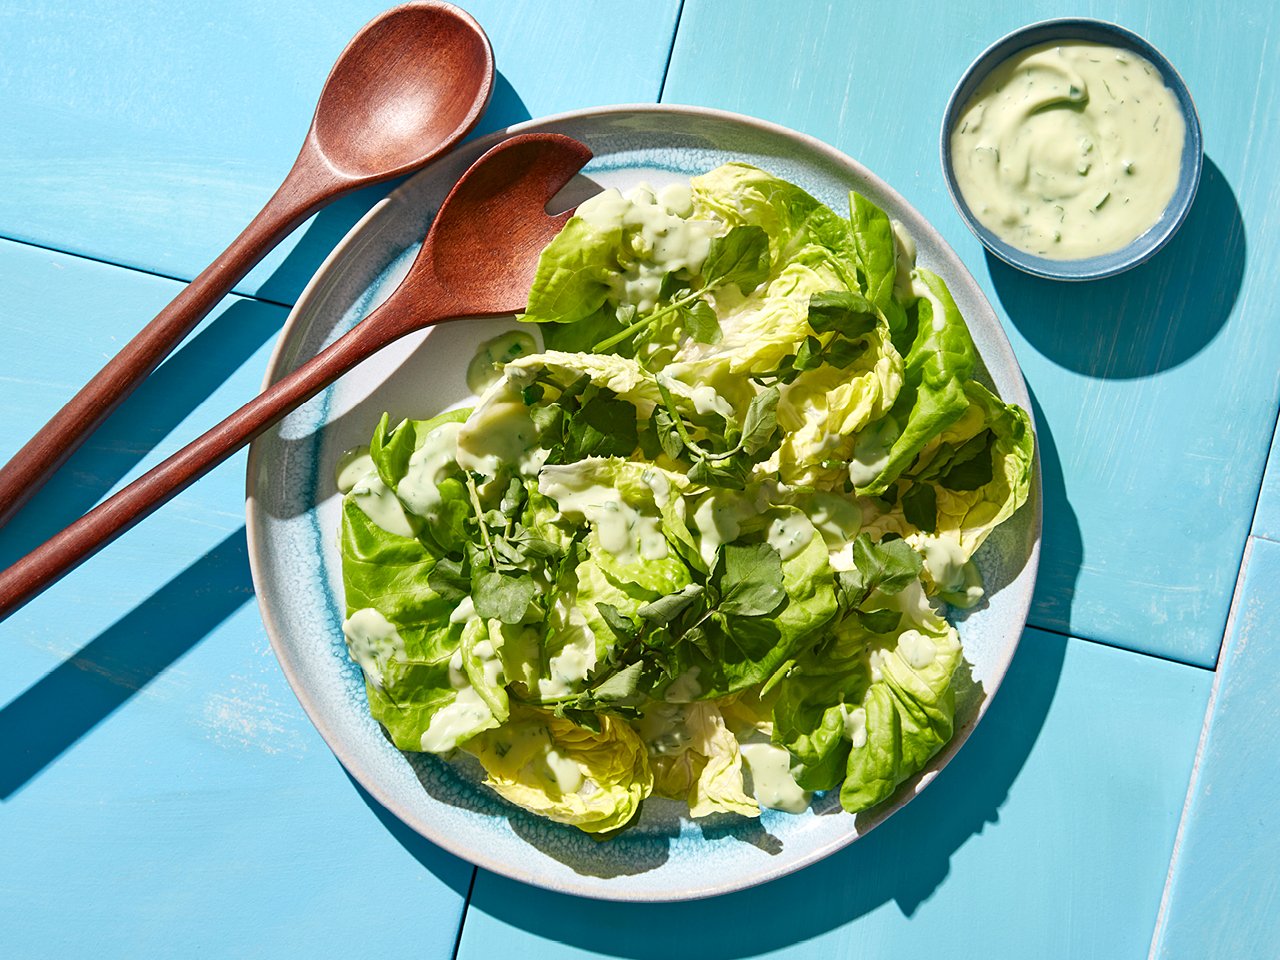 Leafy greens with avocado ranch dressing on a blue and white pottery plate with wood salad tongs at the side and a bowl of buttermilk dressing on a blue table